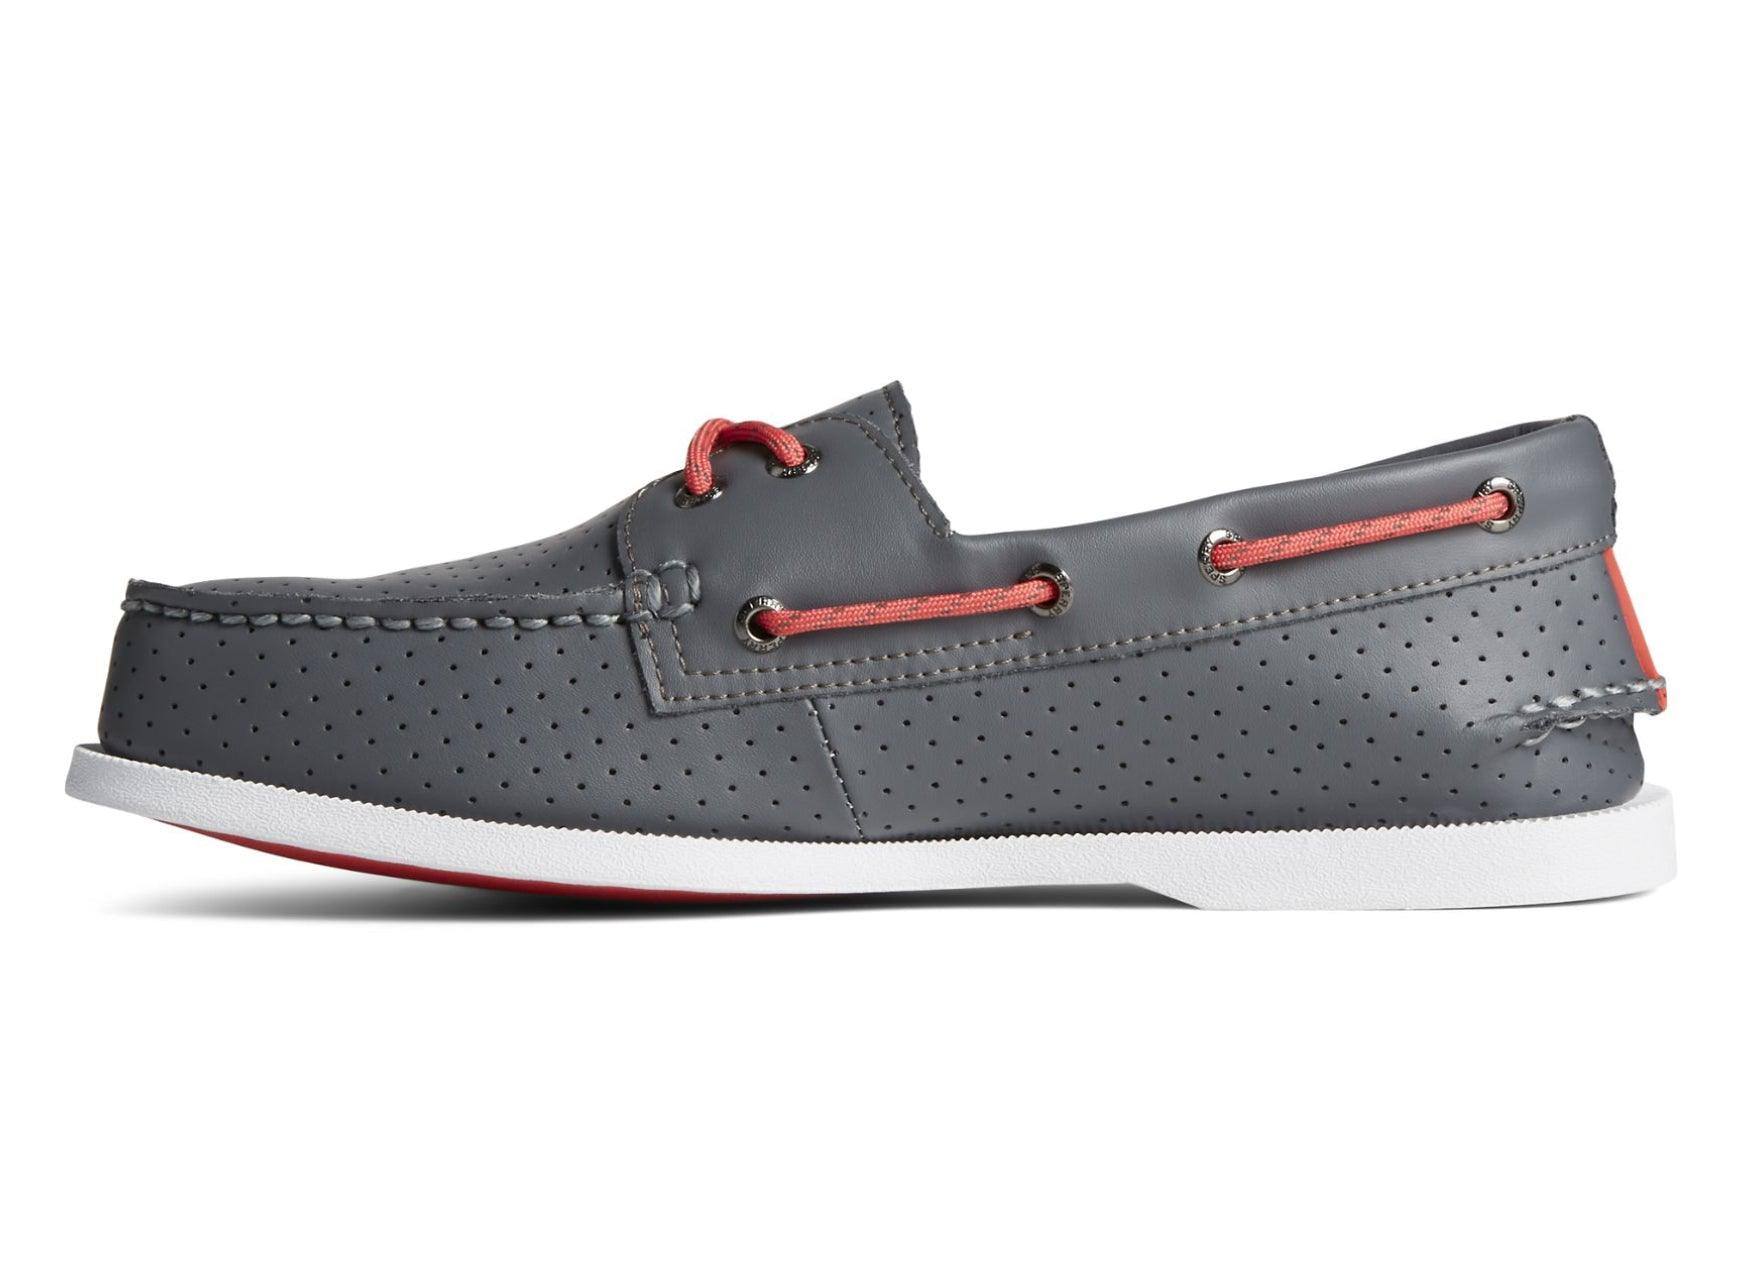 Men’s A/O Resort Perf - The Shoe CollectiveSperry